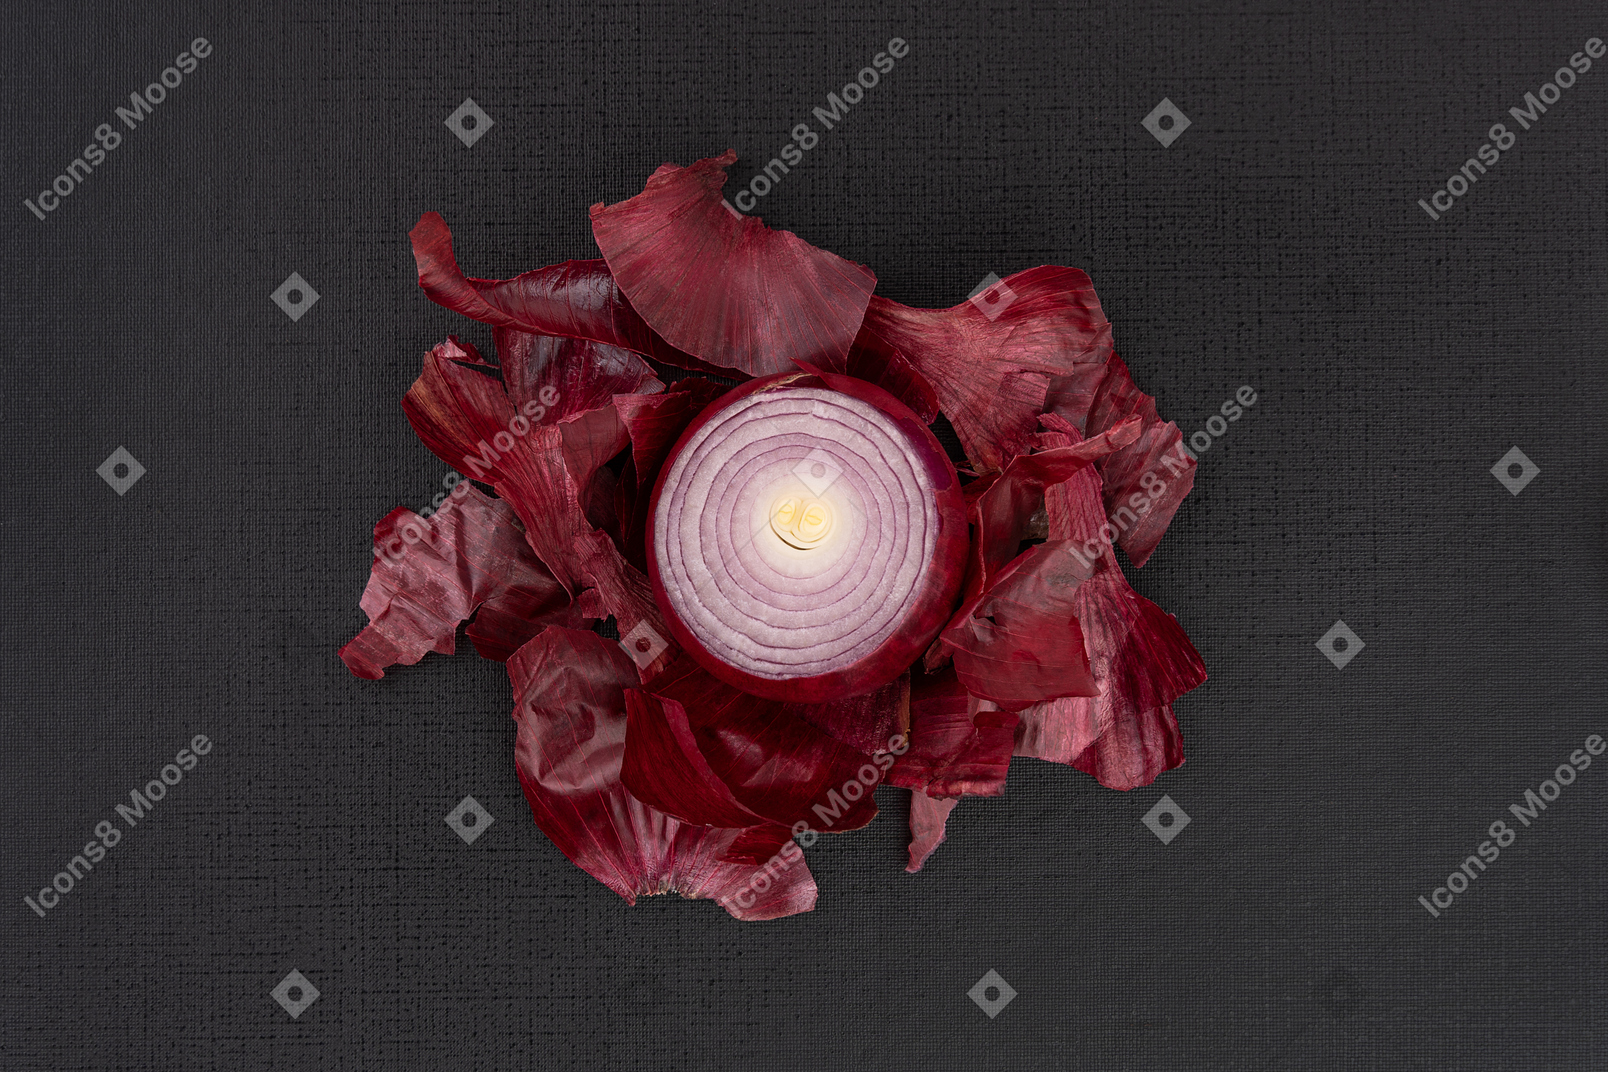 Red onion and its skins on black background